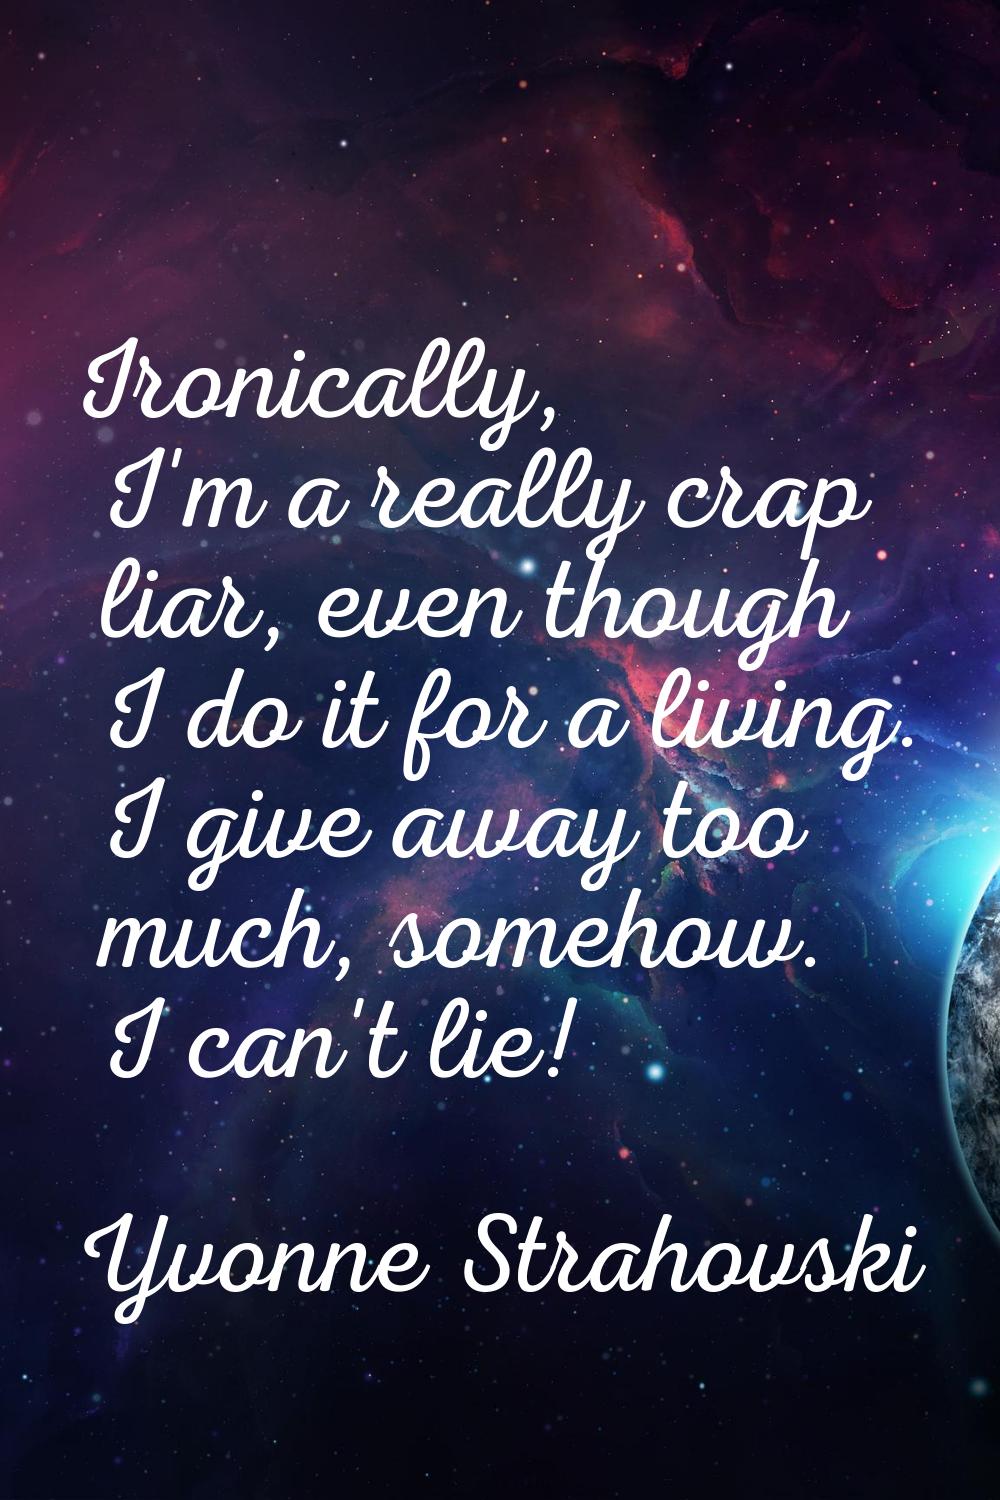 Ironically, I'm a really crap liar, even though I do it for a living. I give away too much, somehow